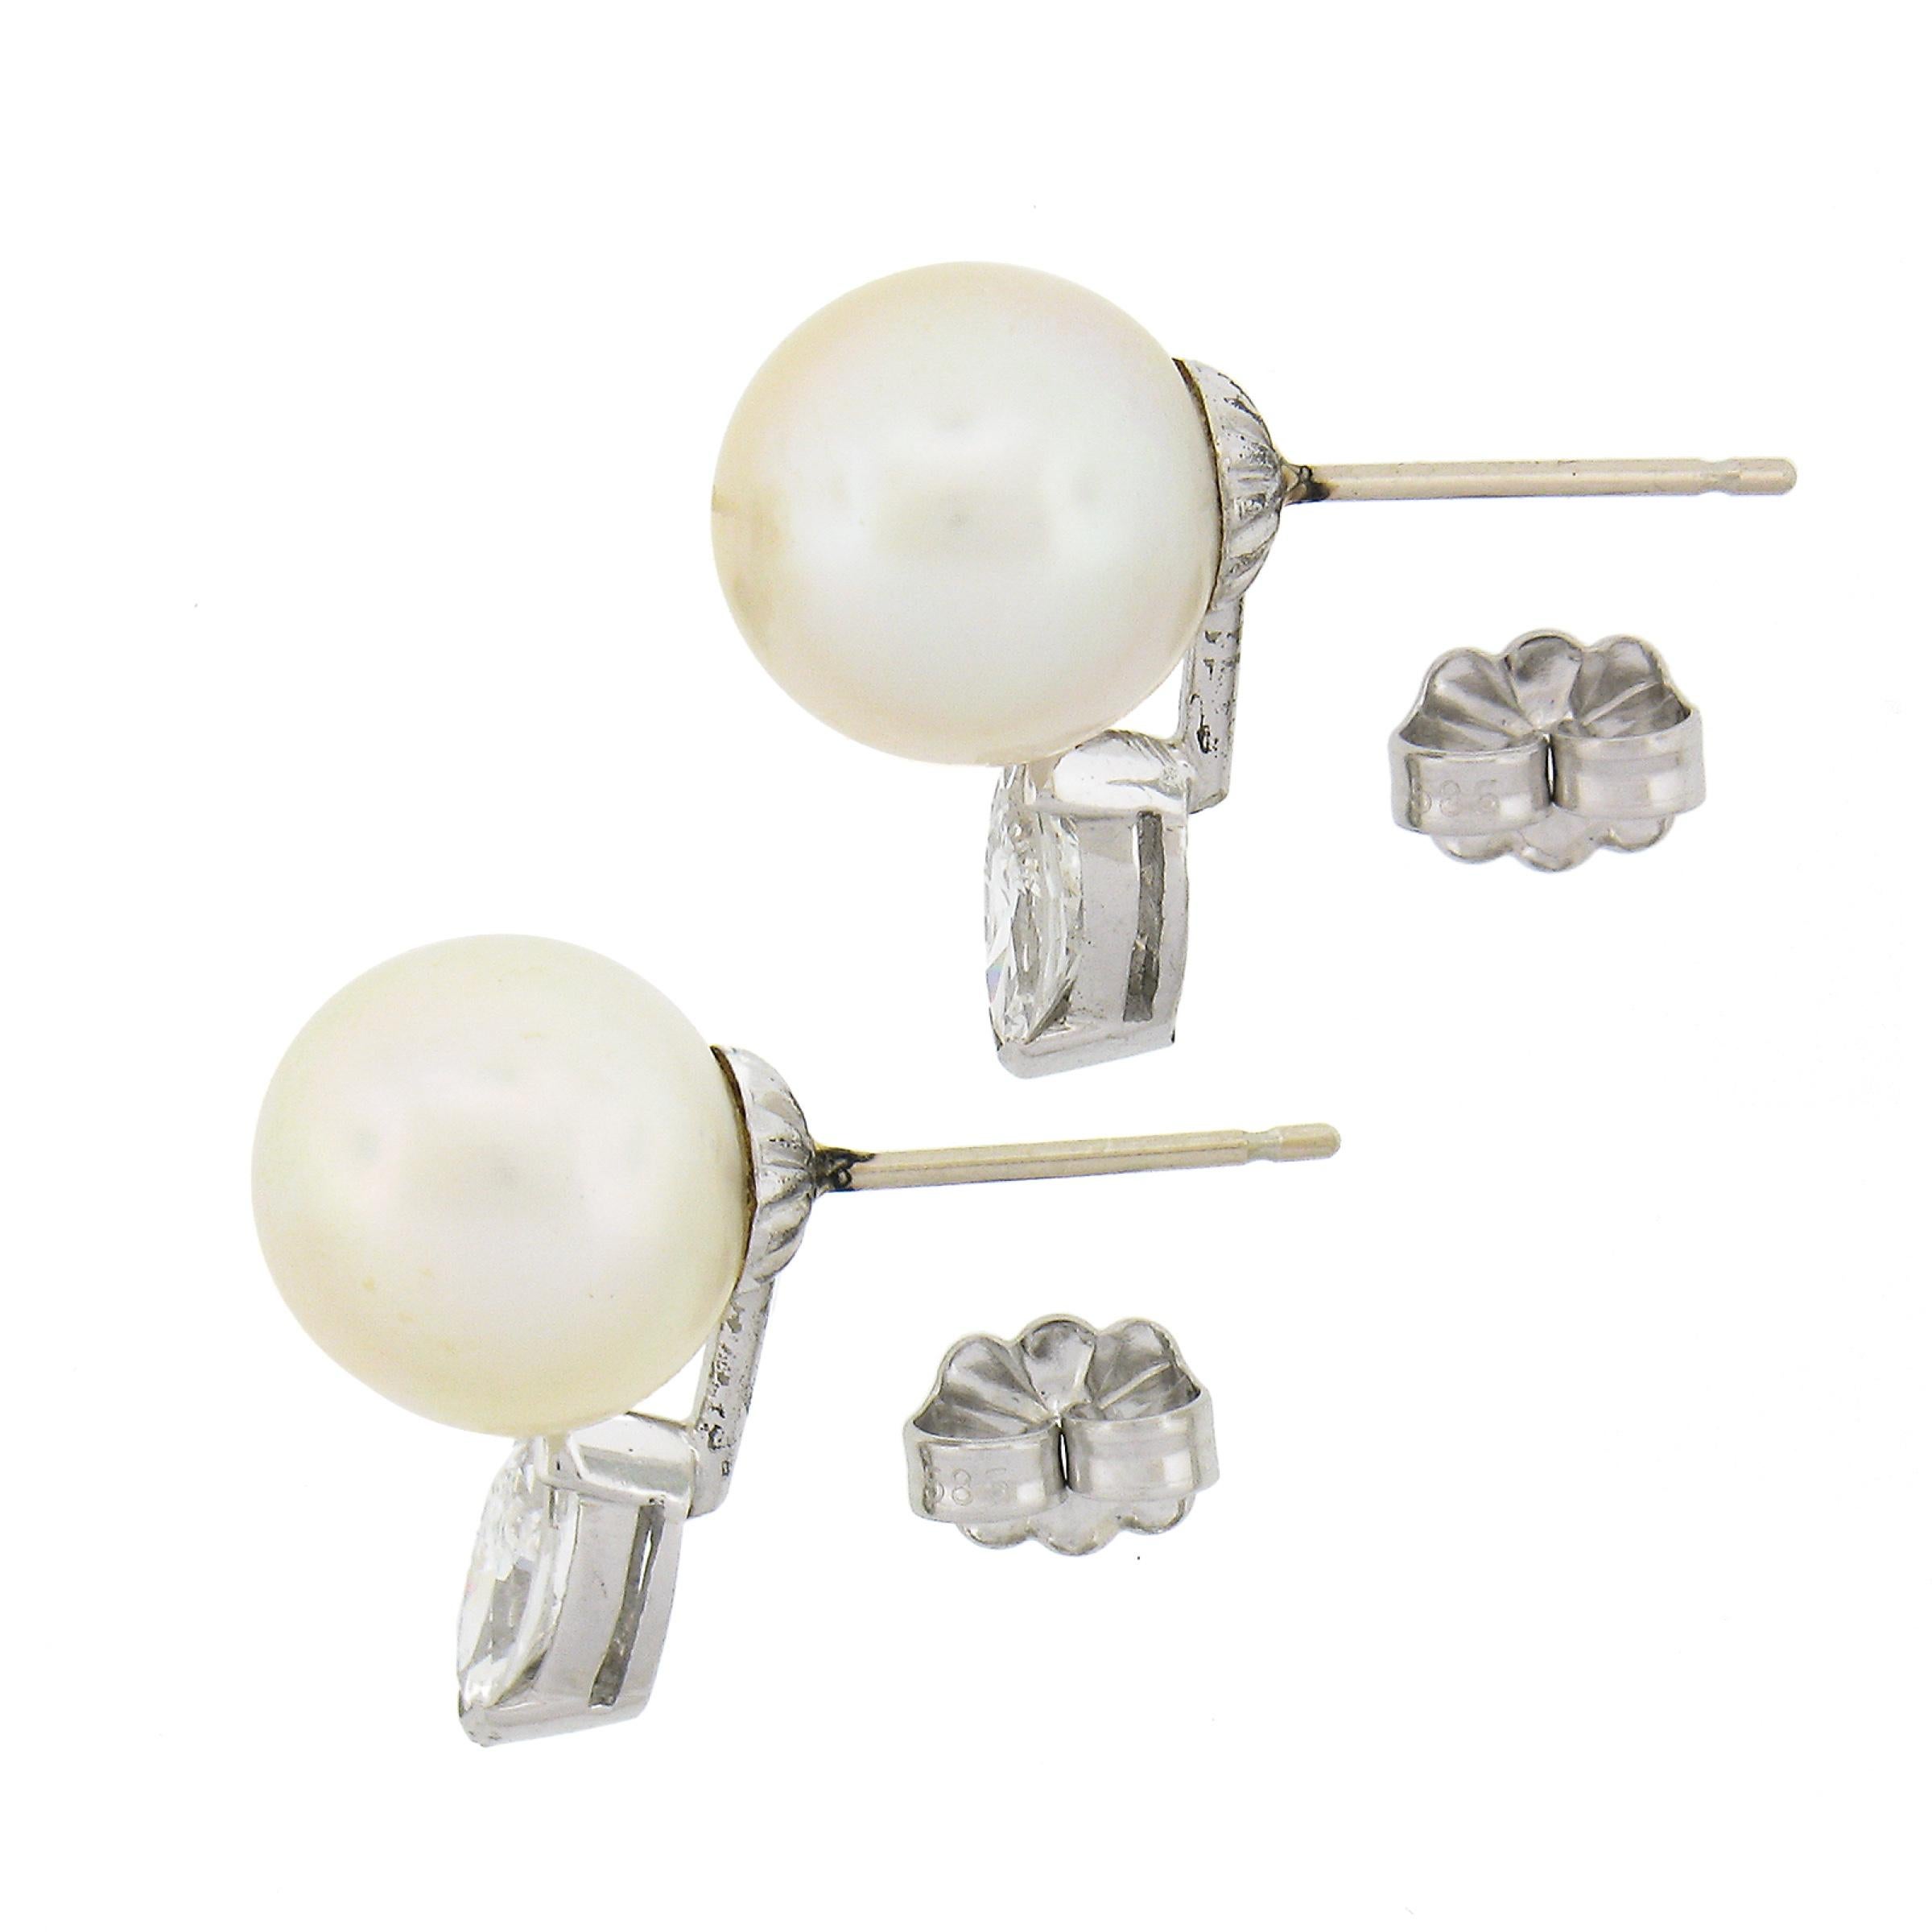 Vintage 14k Gold 10mm FINE Cultured Pearl & 0.65ctw Diamond Drop Stud Earrings In Excellent Condition For Sale In Montclair, NJ